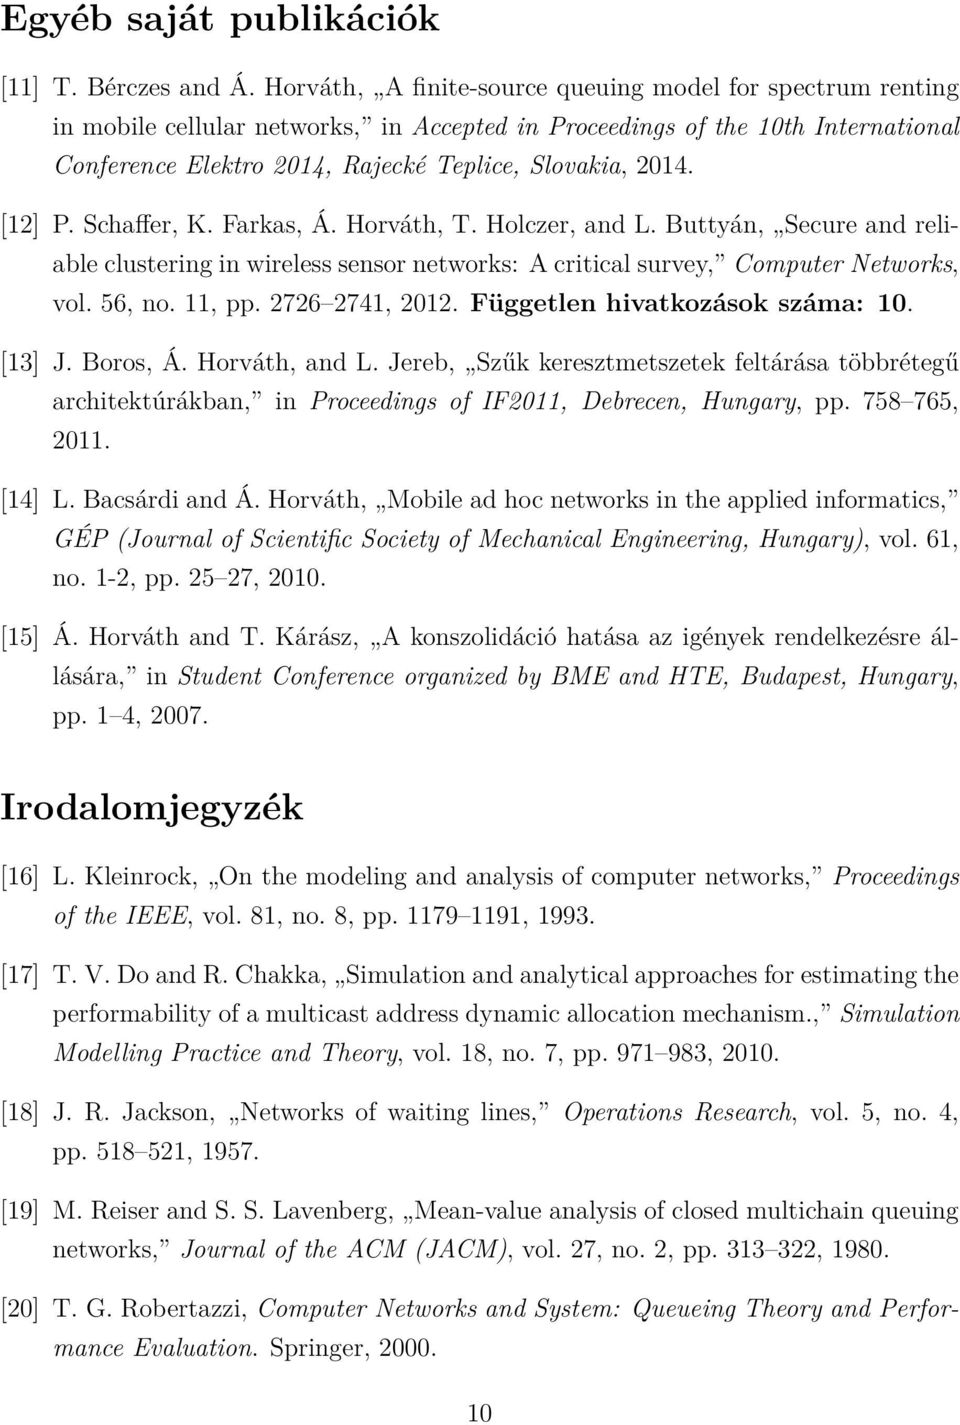 [12] P. Schaffer, K. Farkas, Á. Horváth, T. Holczer, and L. Buttyán, Secure and reliable clustering in wireless sensor networks: A critical survey, Computer Networks, vol. 56, no. 11, pp.